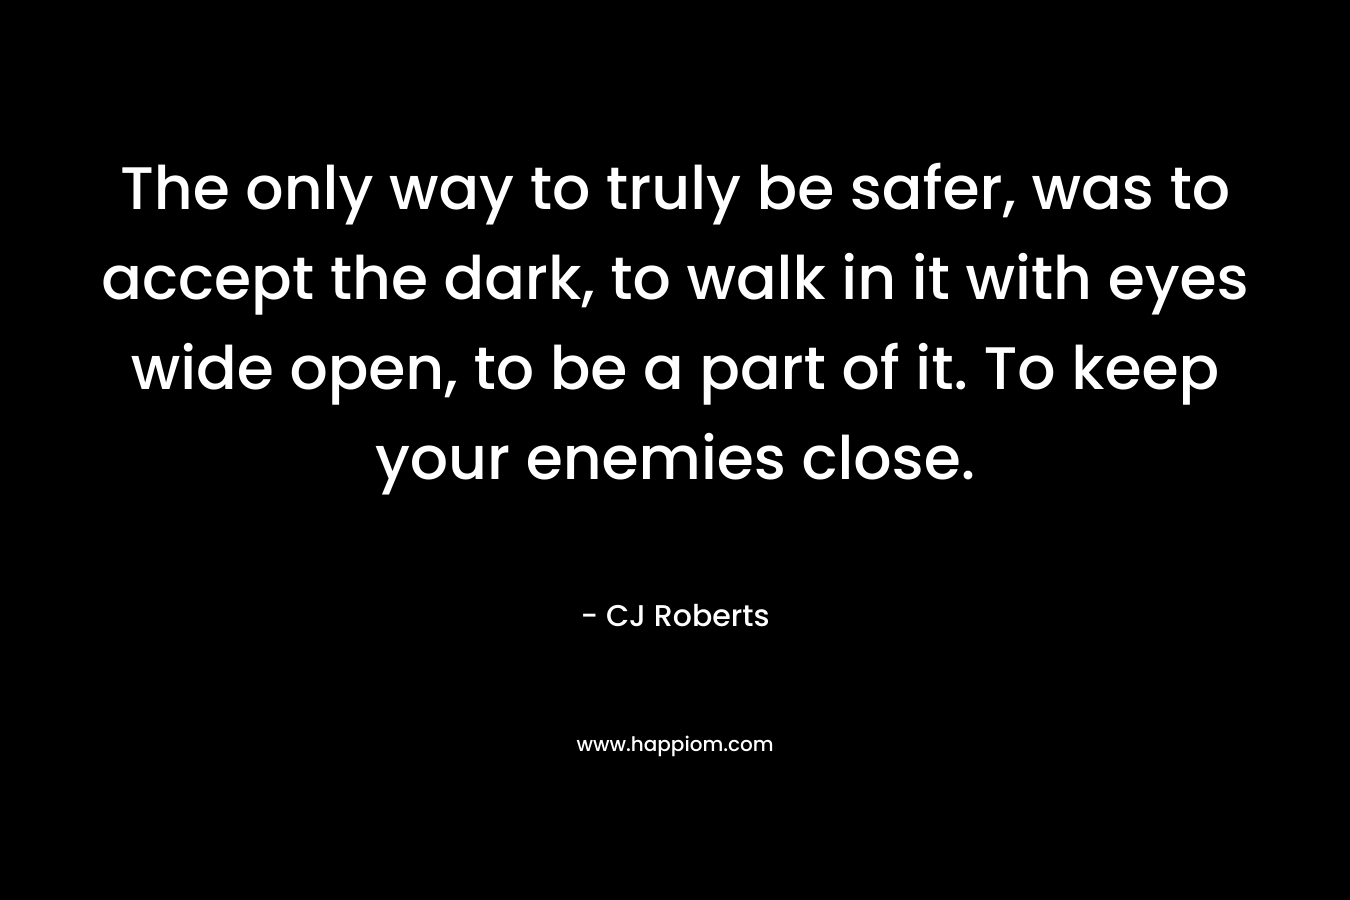 The only way to truly be safer, was to accept the dark, to walk in it with eyes wide open, to be a part of it. To keep your enemies close. – CJ Roberts